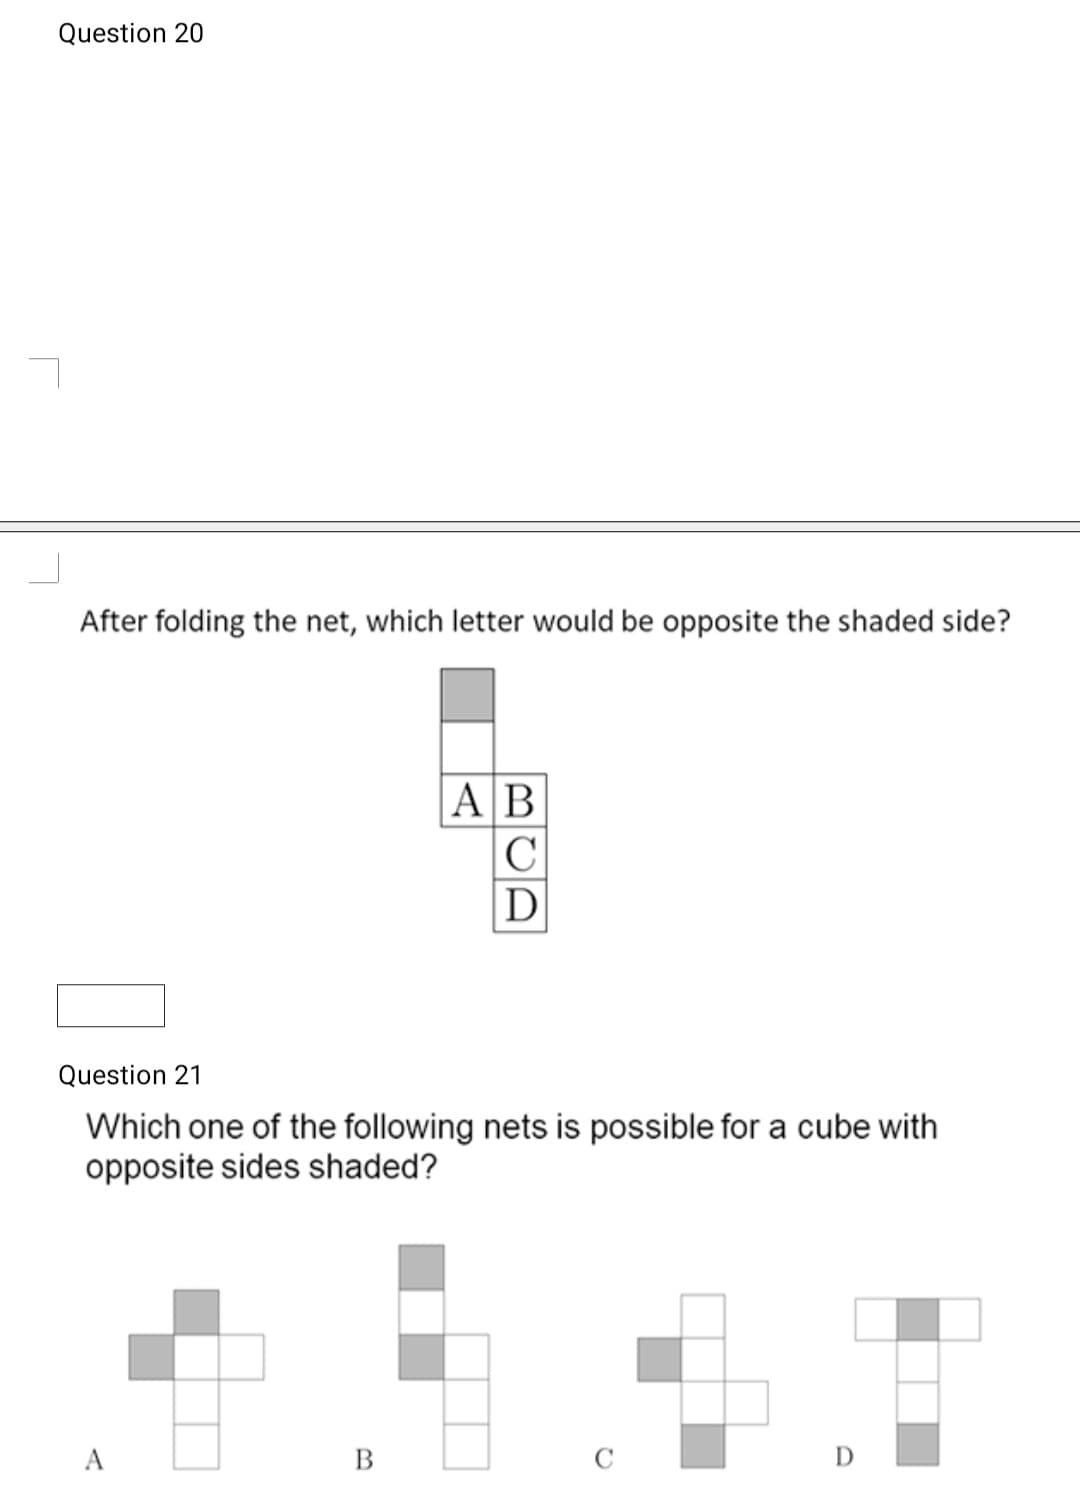 Question 20
After folding the net, which letter would be opposite the shaded side?
|AB
|C
D
Question 21
Which one of the following nets is possible for a cube with
opposite sides shaded?
A
В
D
